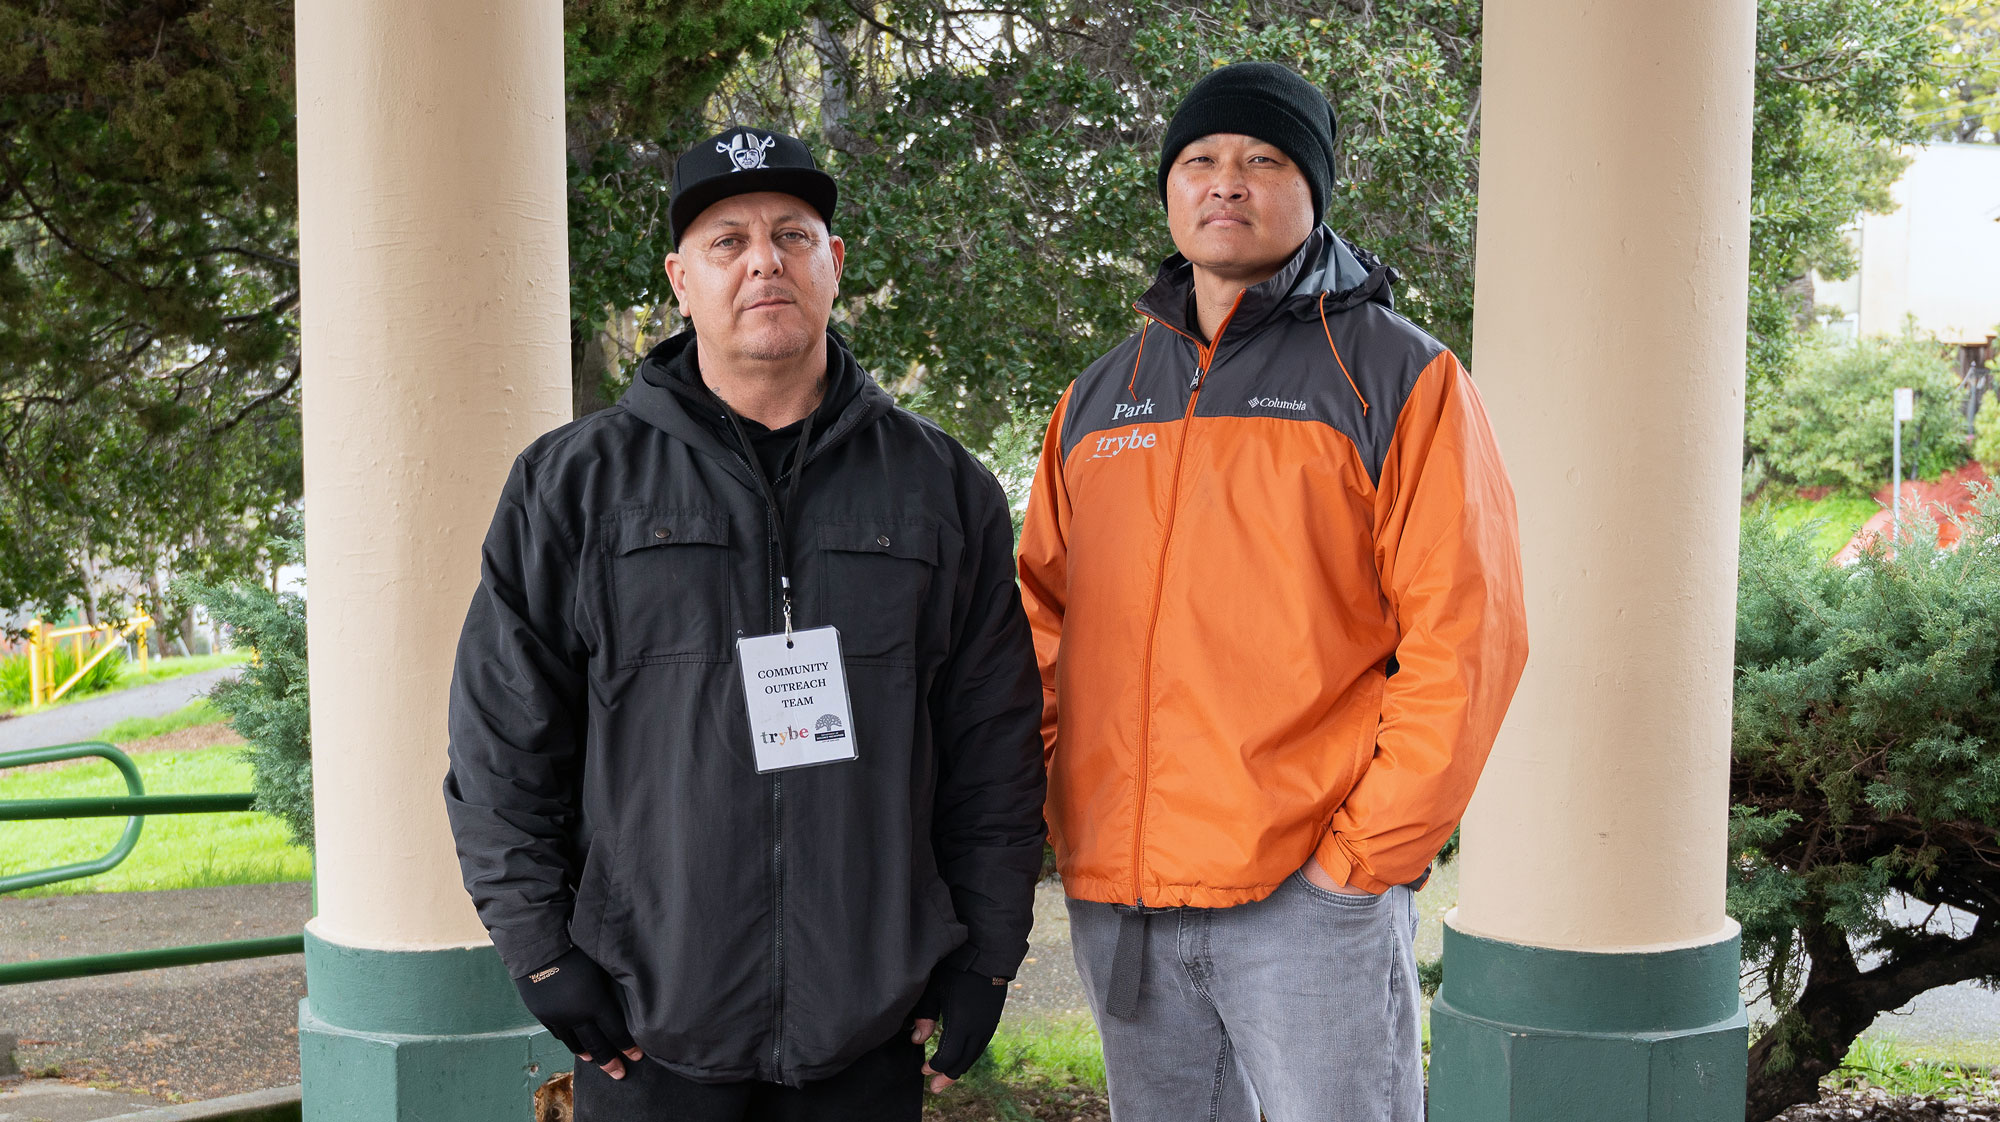 Hector Cruz and Andrew Park look at camera wearing cool weather clothing, standing under a pergola at a park